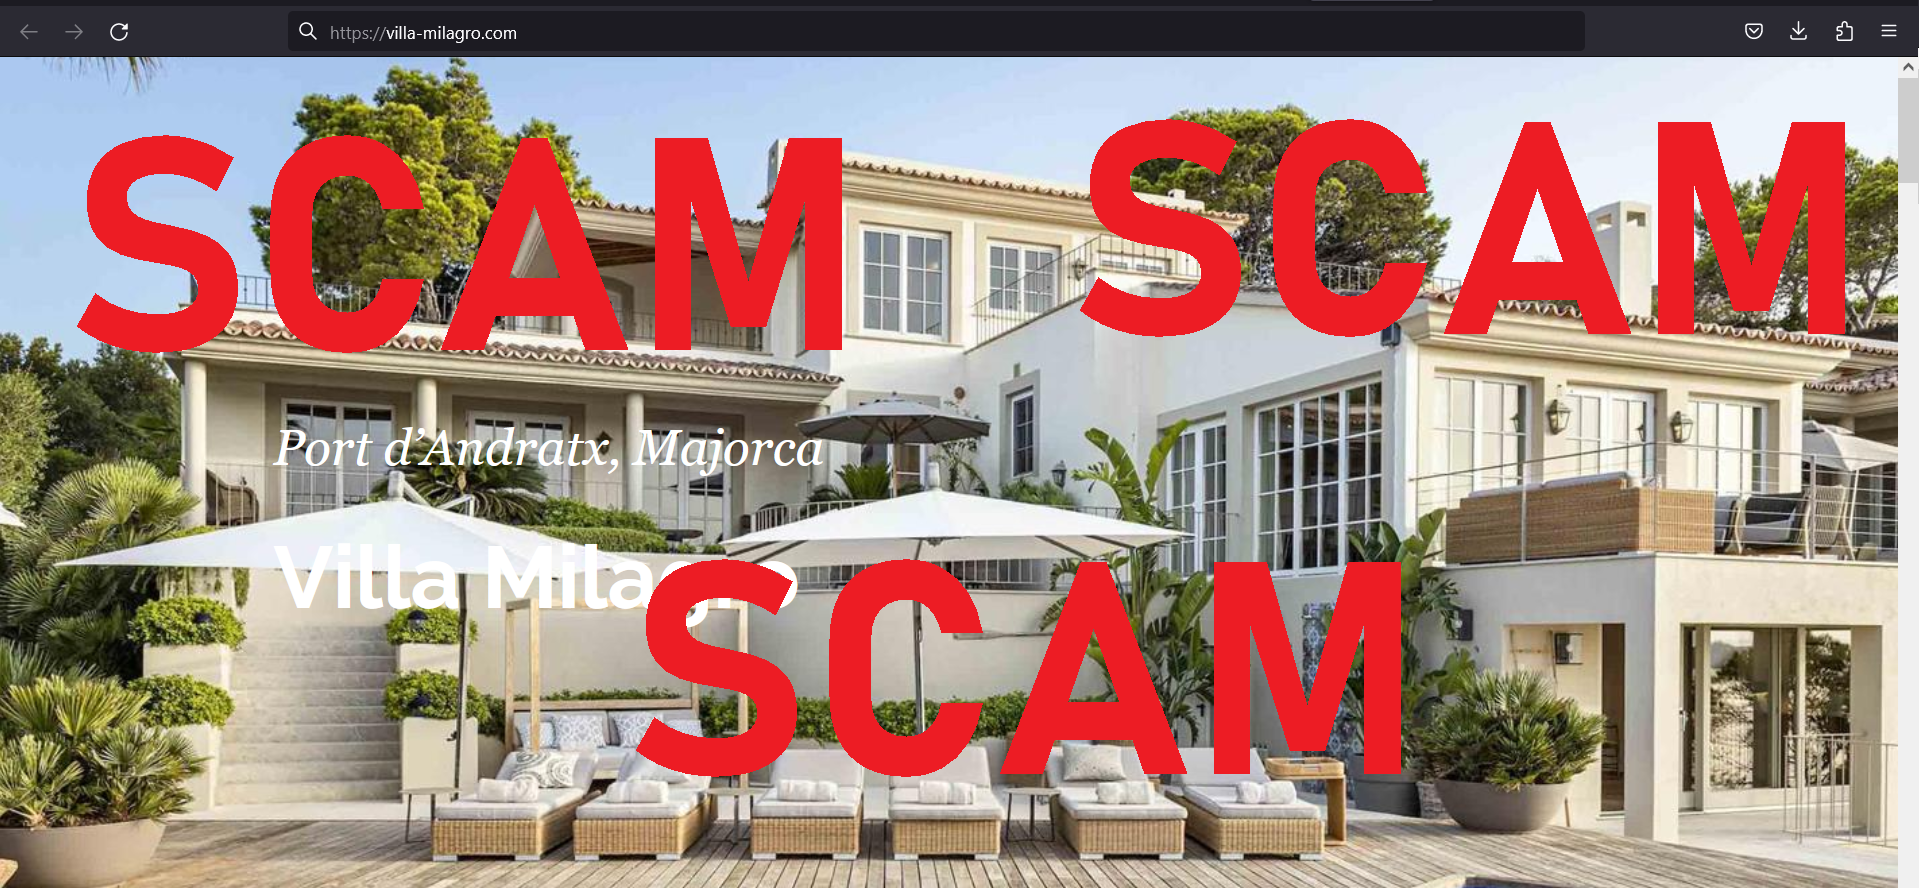 You are currently viewing Fraudulent website: villa-milagro.com SCAM SCAM